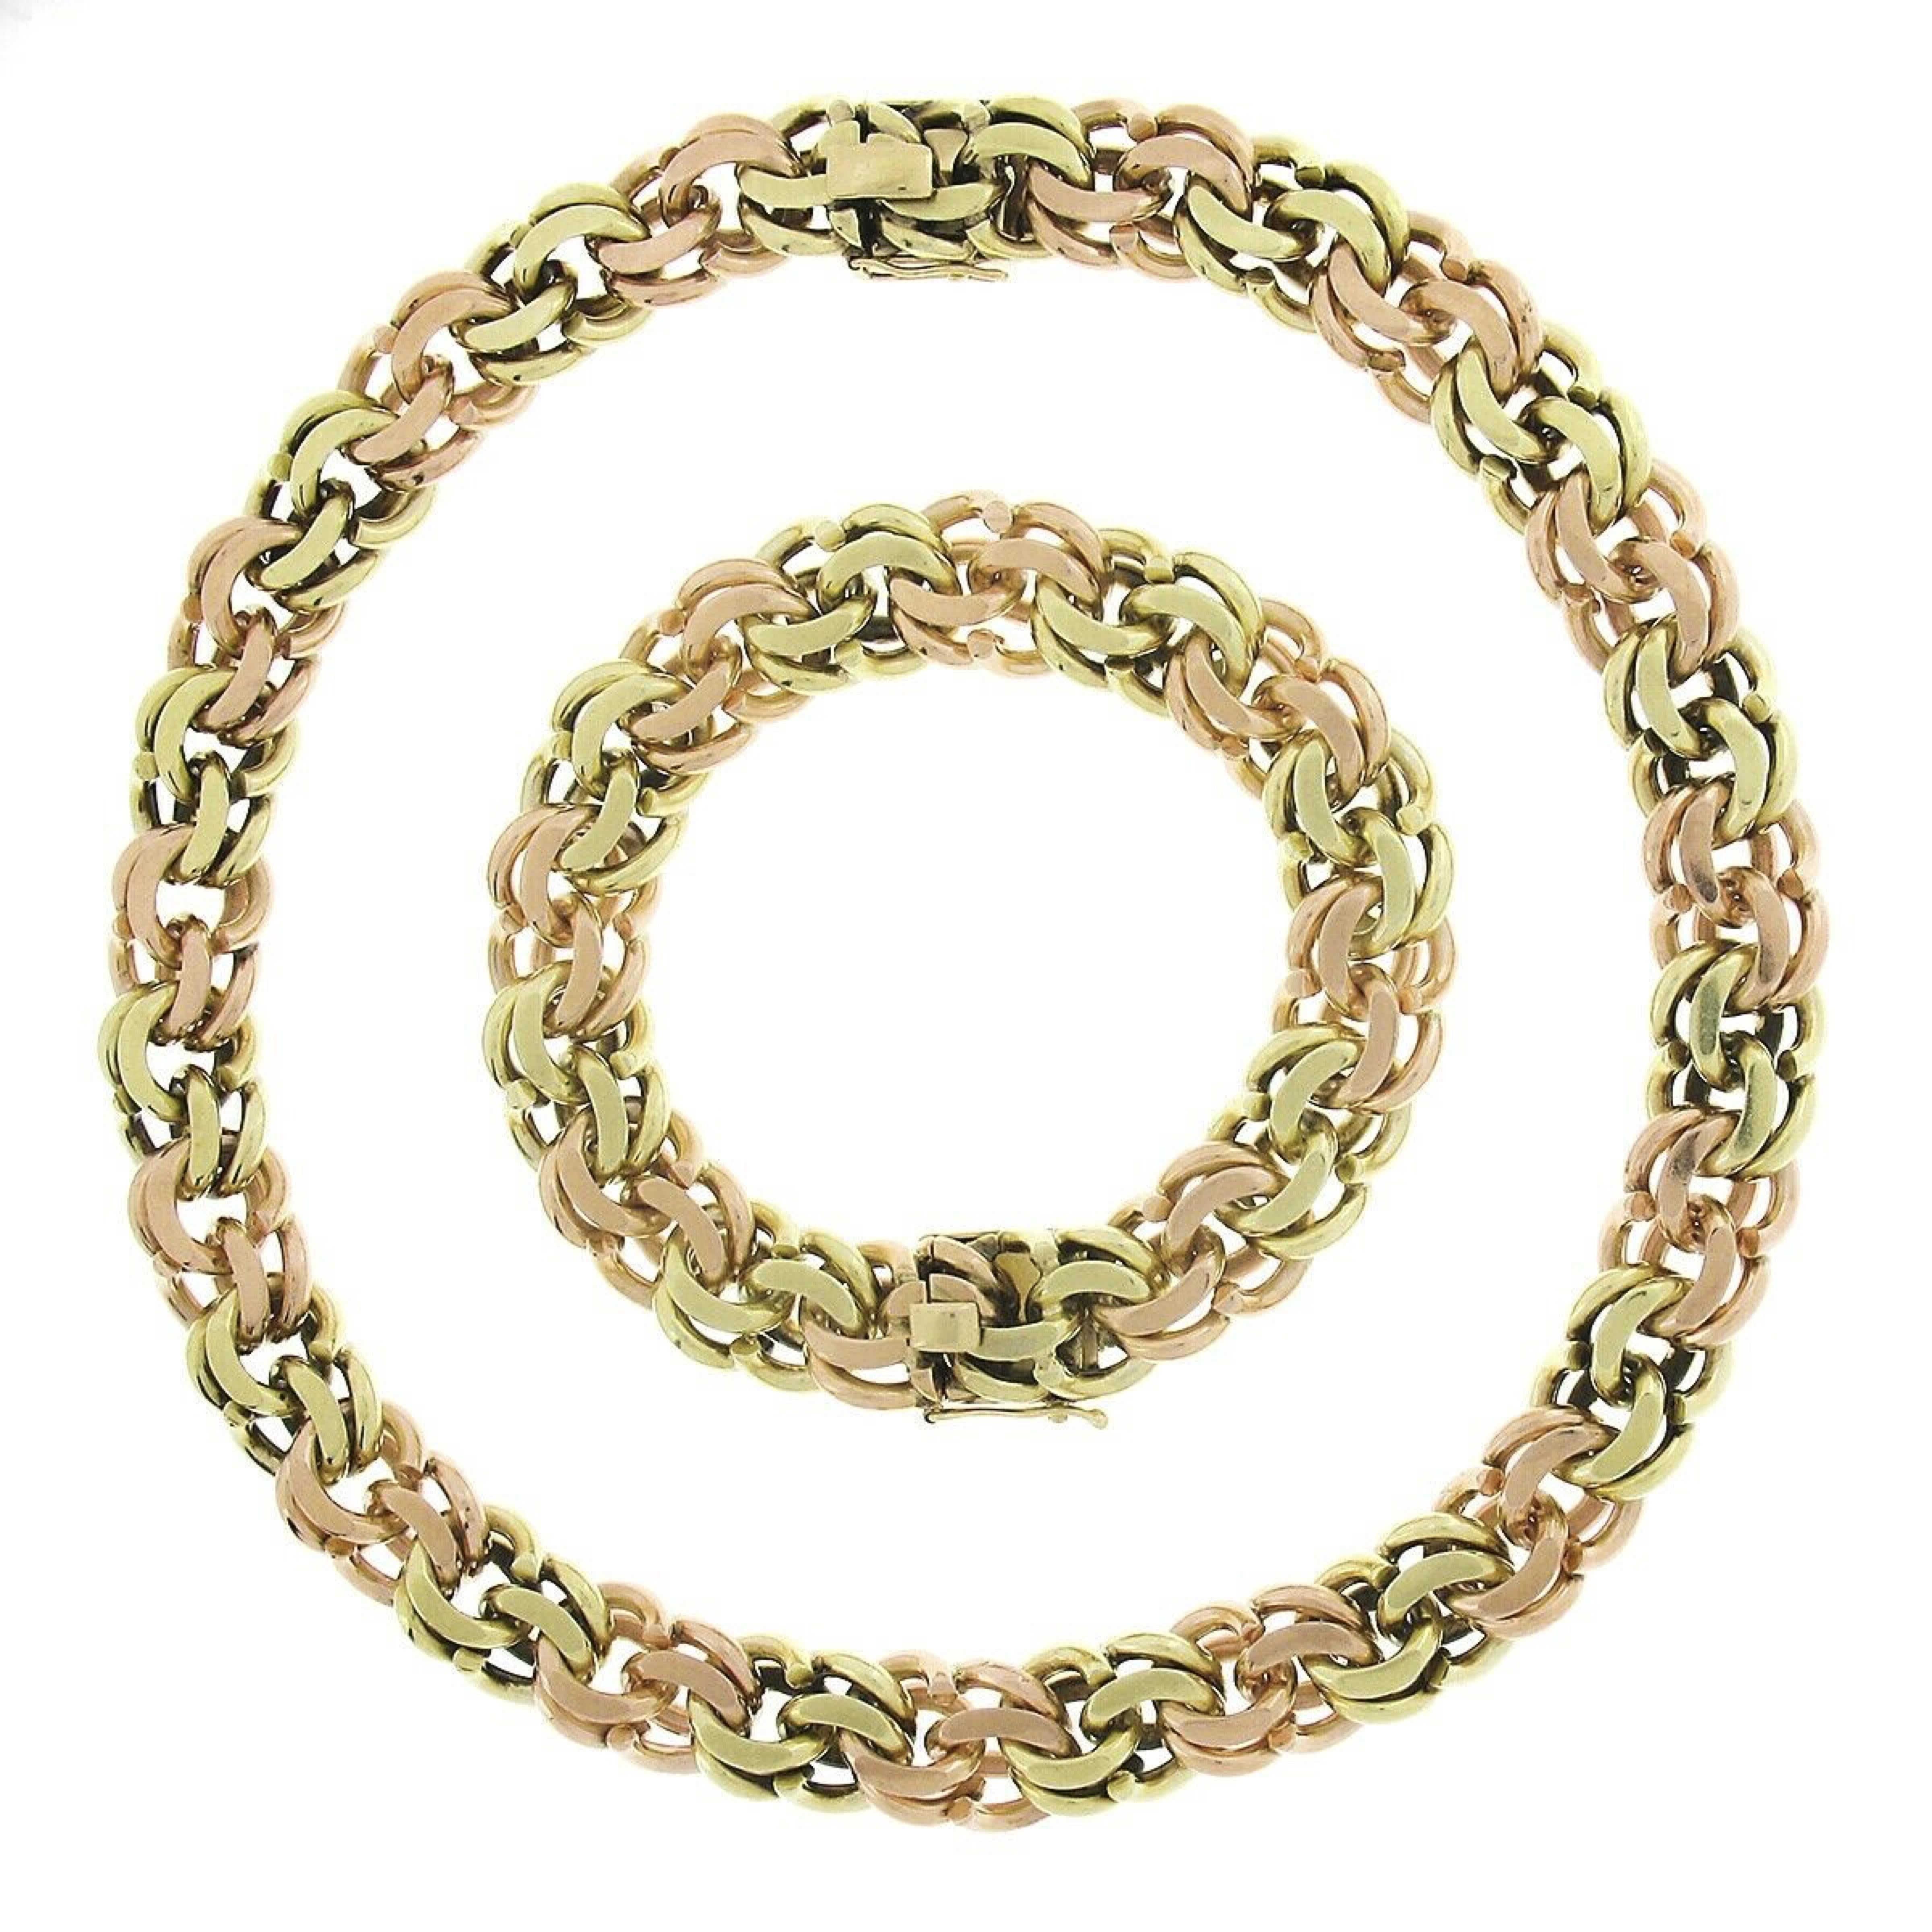 This magnificent and very well made vintage Cartier matching necklace and bracelet set is crafted from solid 14k green and rose gold. The substantial and heavy bracelet and necklace are constructed from wide, alternating green and rose gold, double